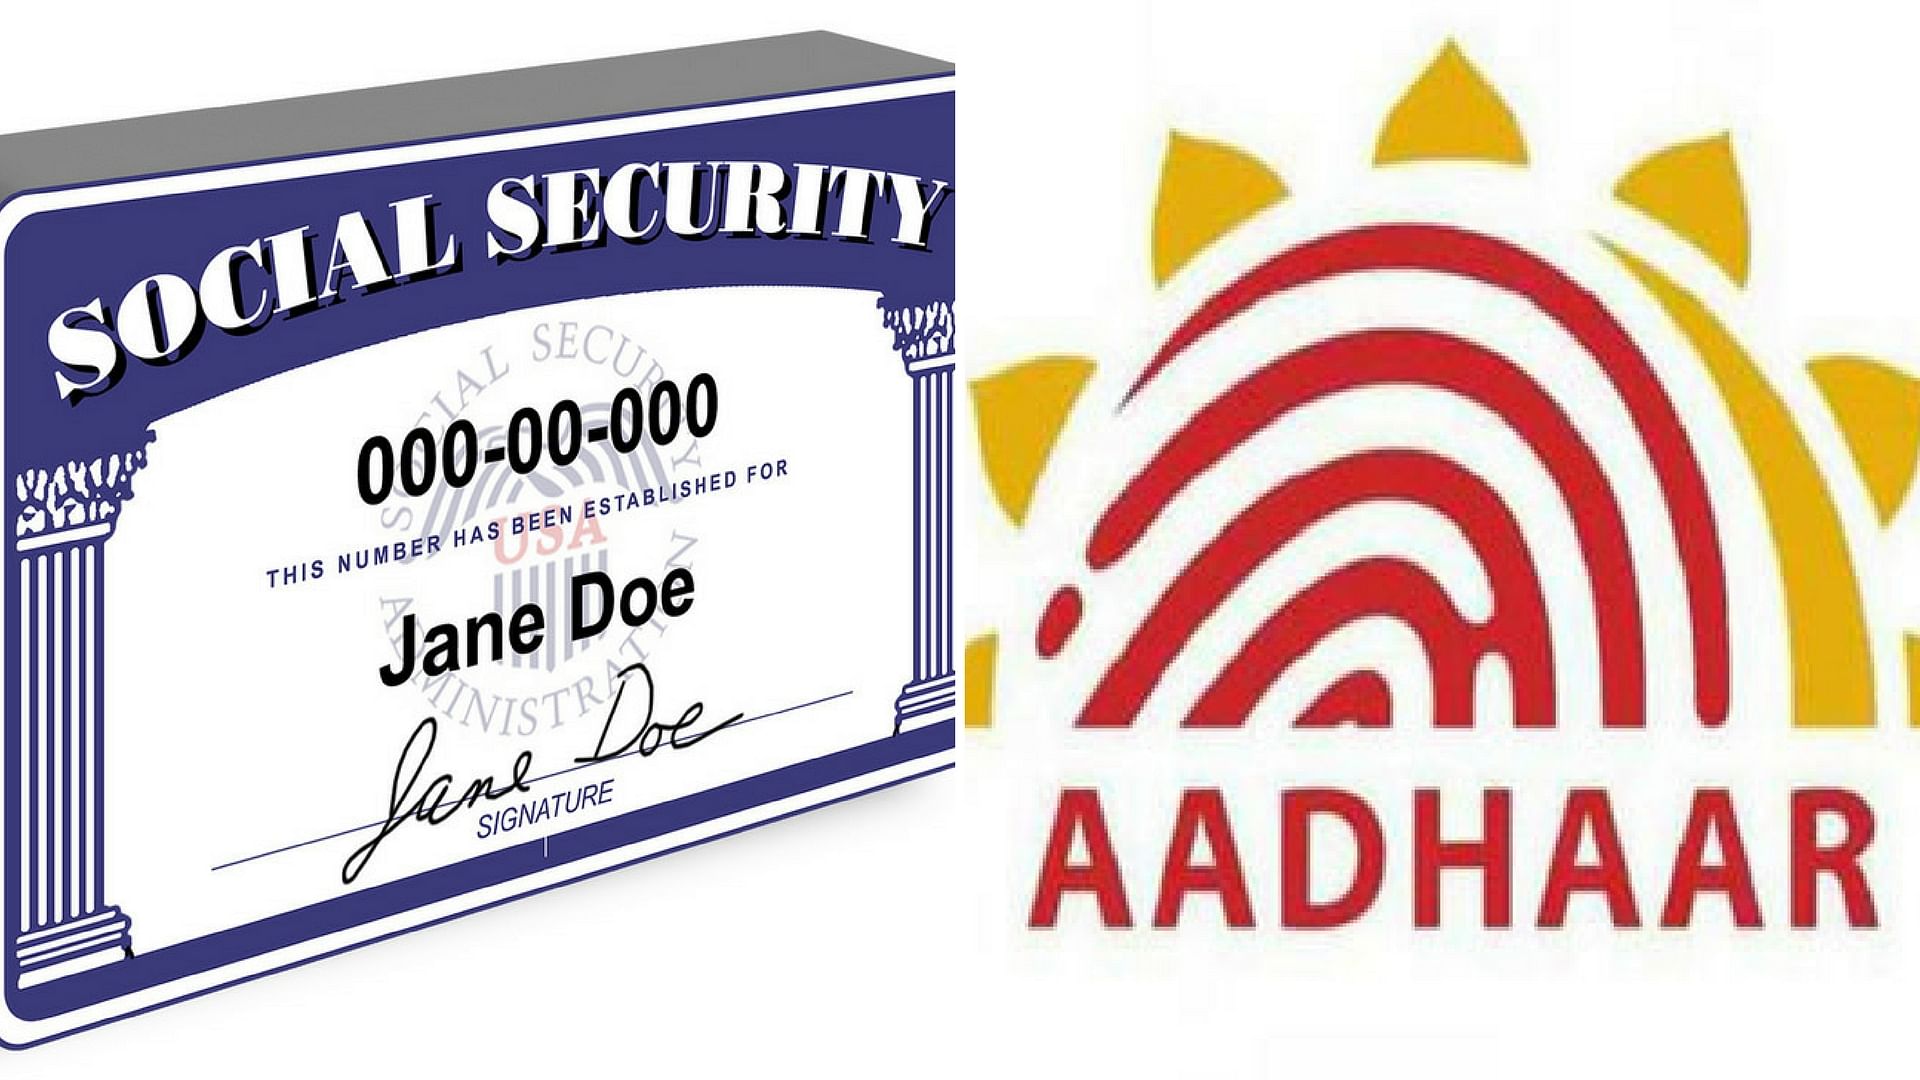 India’s unique identification project is the world’s largest biometrics-based identity project. As of January 2017, over 111 crore Indians have an Aadhaar number.